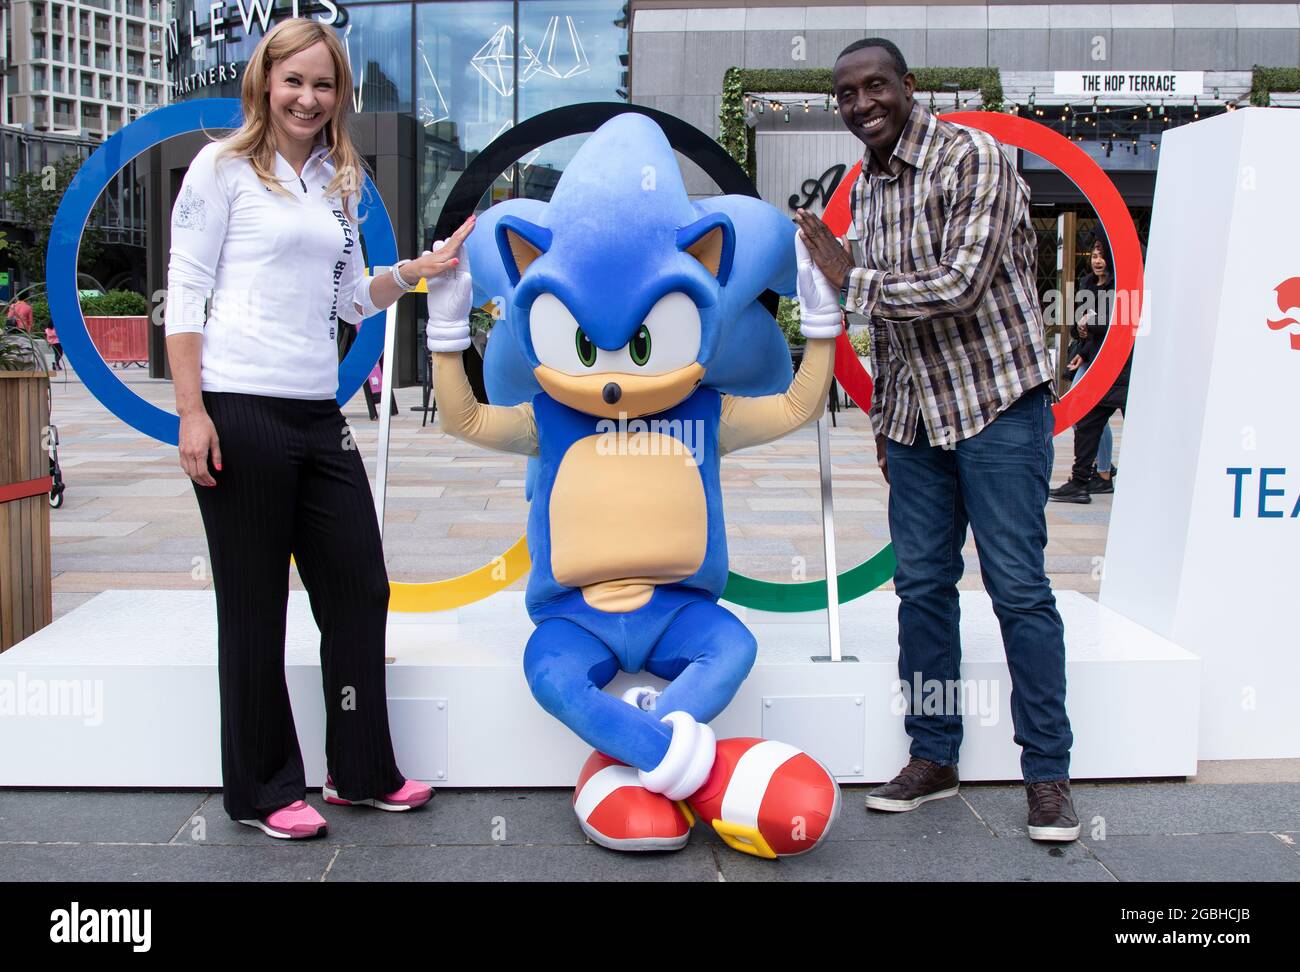 Team GB Athletes Joanna Roswell who is a double Olympic gold medalist in cycling and Linford Christie who is a gold and sliver medalist in sprinting, launch the Official Olympic game with the help of Sonic The Hedgehog at Team GB Fanzone at Westfield White City, West London, UK. Stock Photo